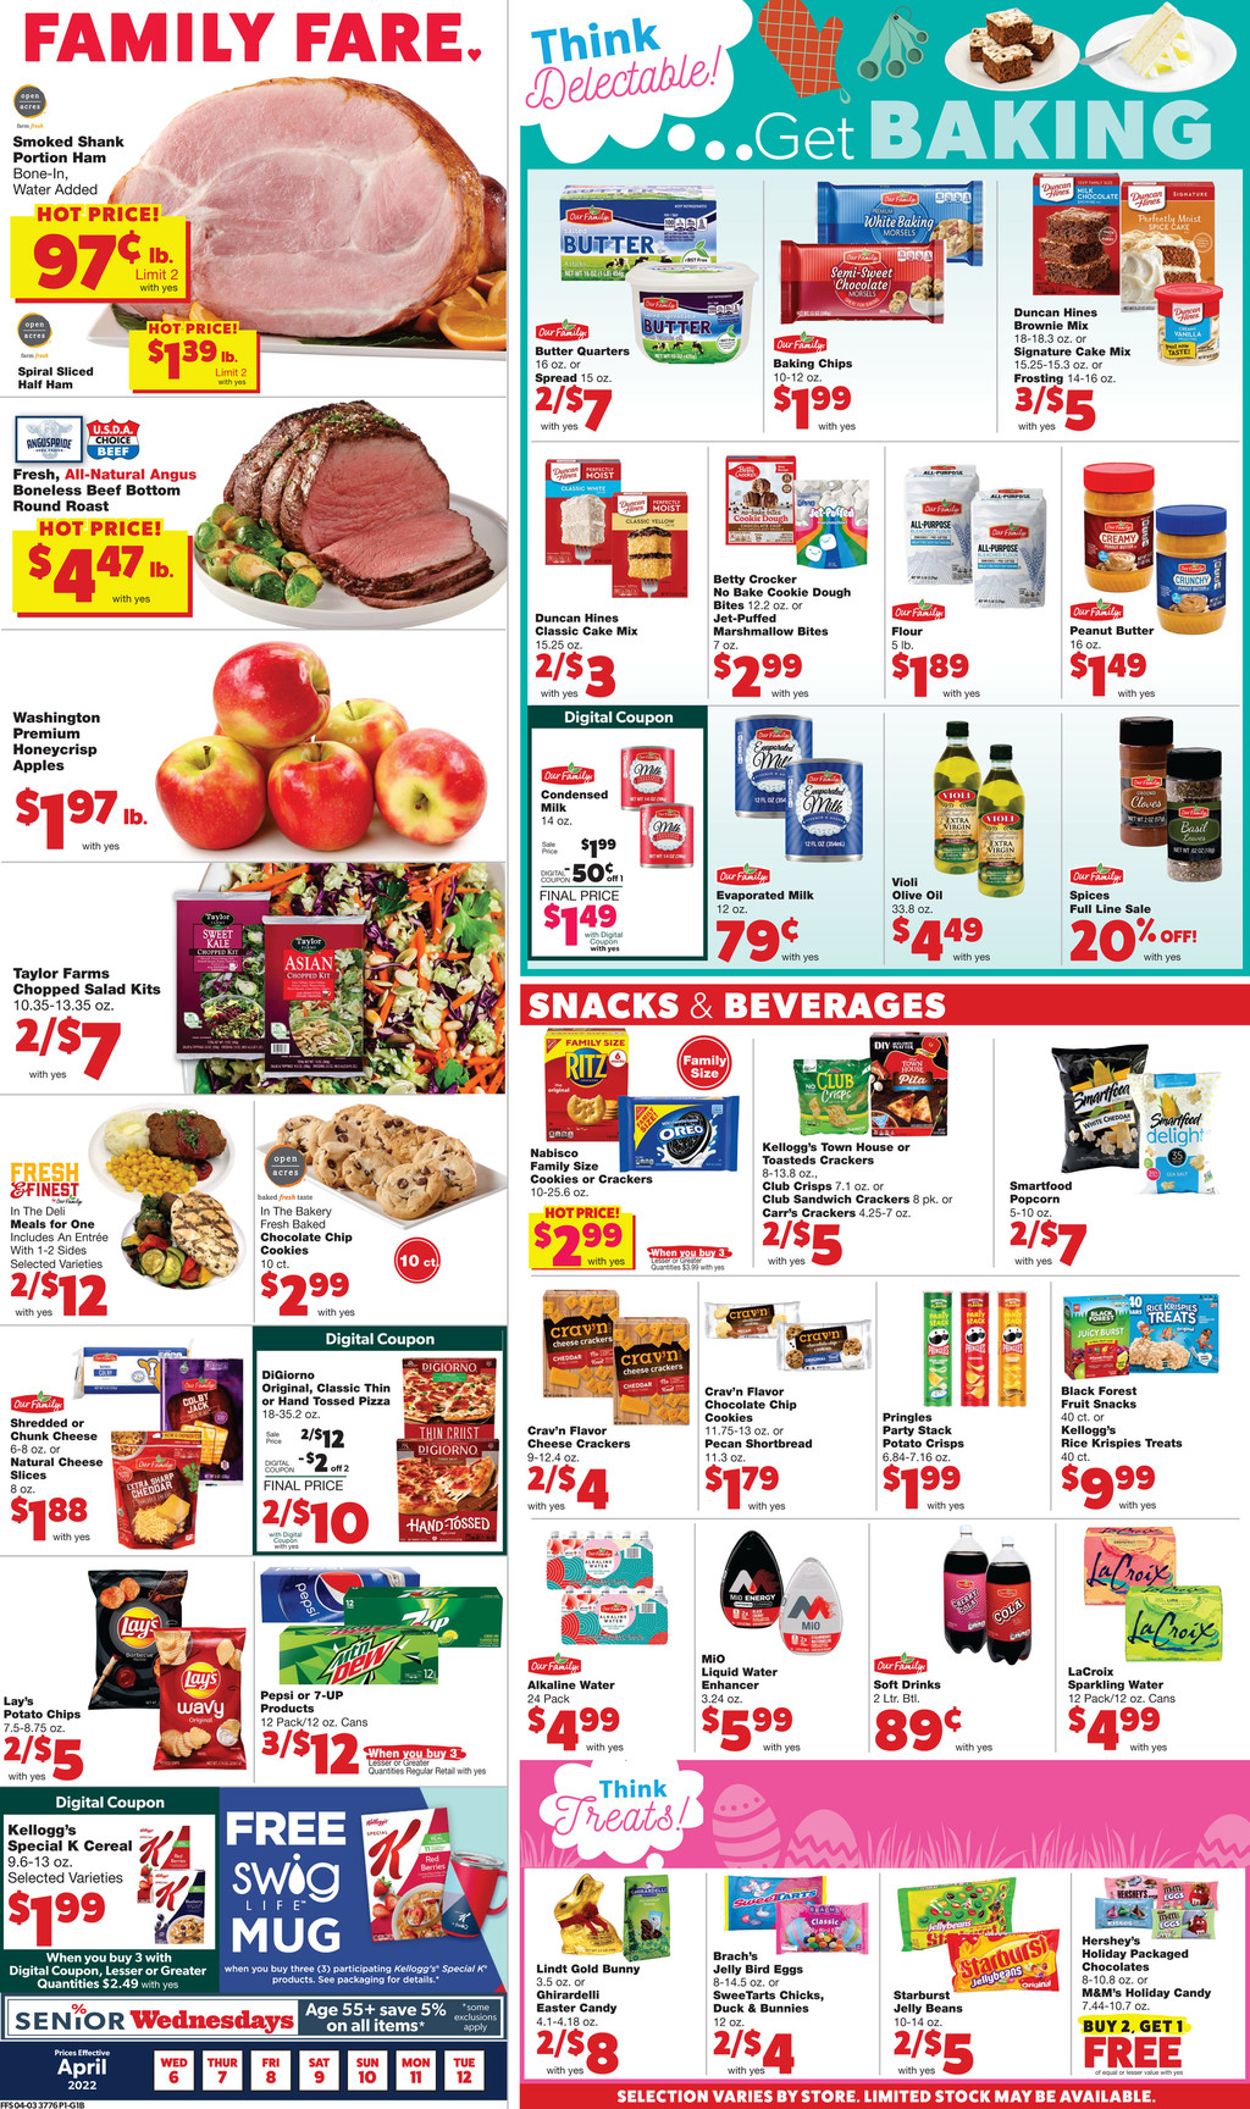 Family Fare EASTER 2022 Weekly Ad Circular - valid 04/06-04/12/2022